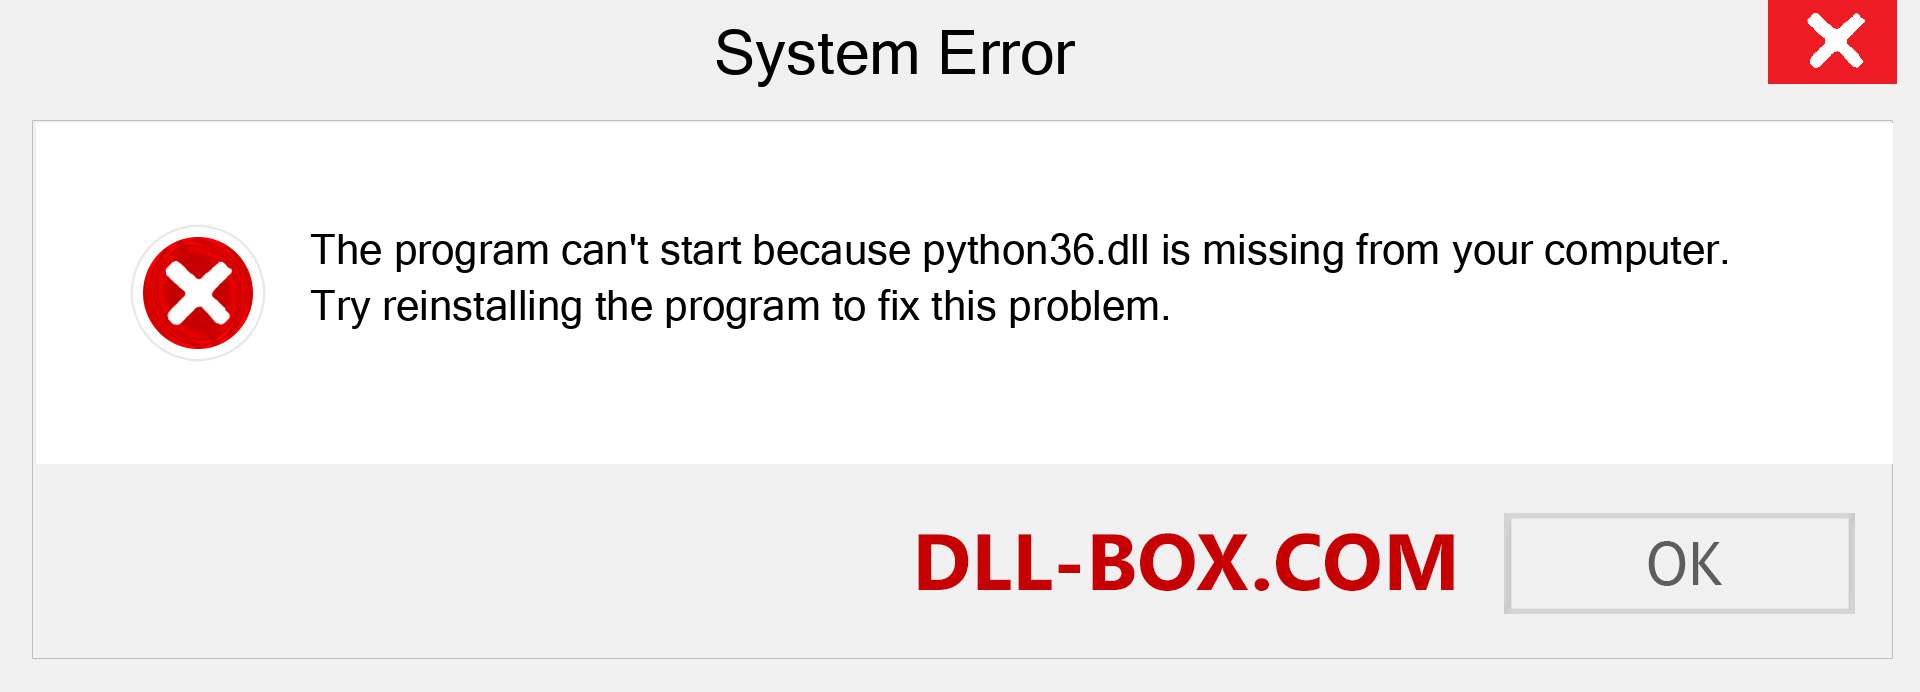  python36.dll file is missing?. Download for Windows 7, 8, 10 - Fix  python36 dll Missing Error on Windows, photos, images